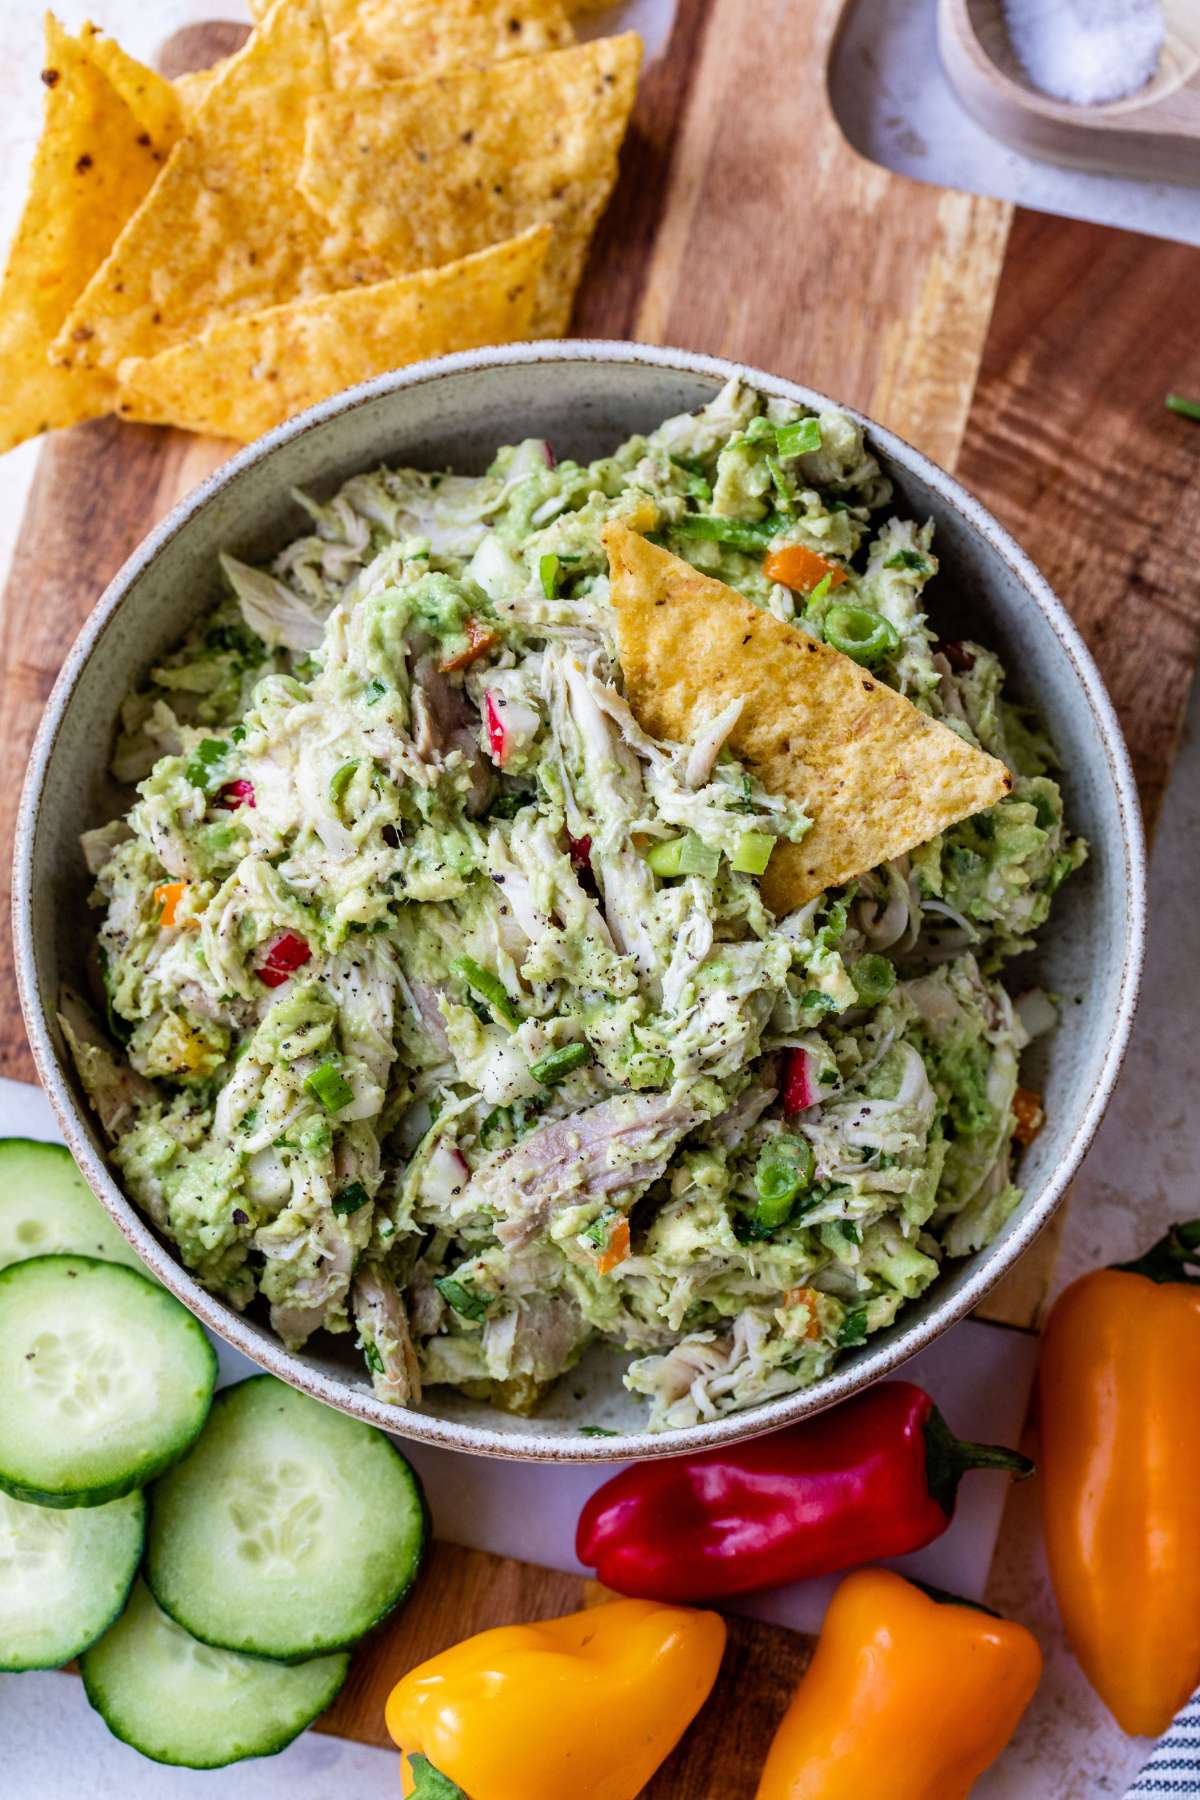 Avocado chicken salad served with chips and veggies.